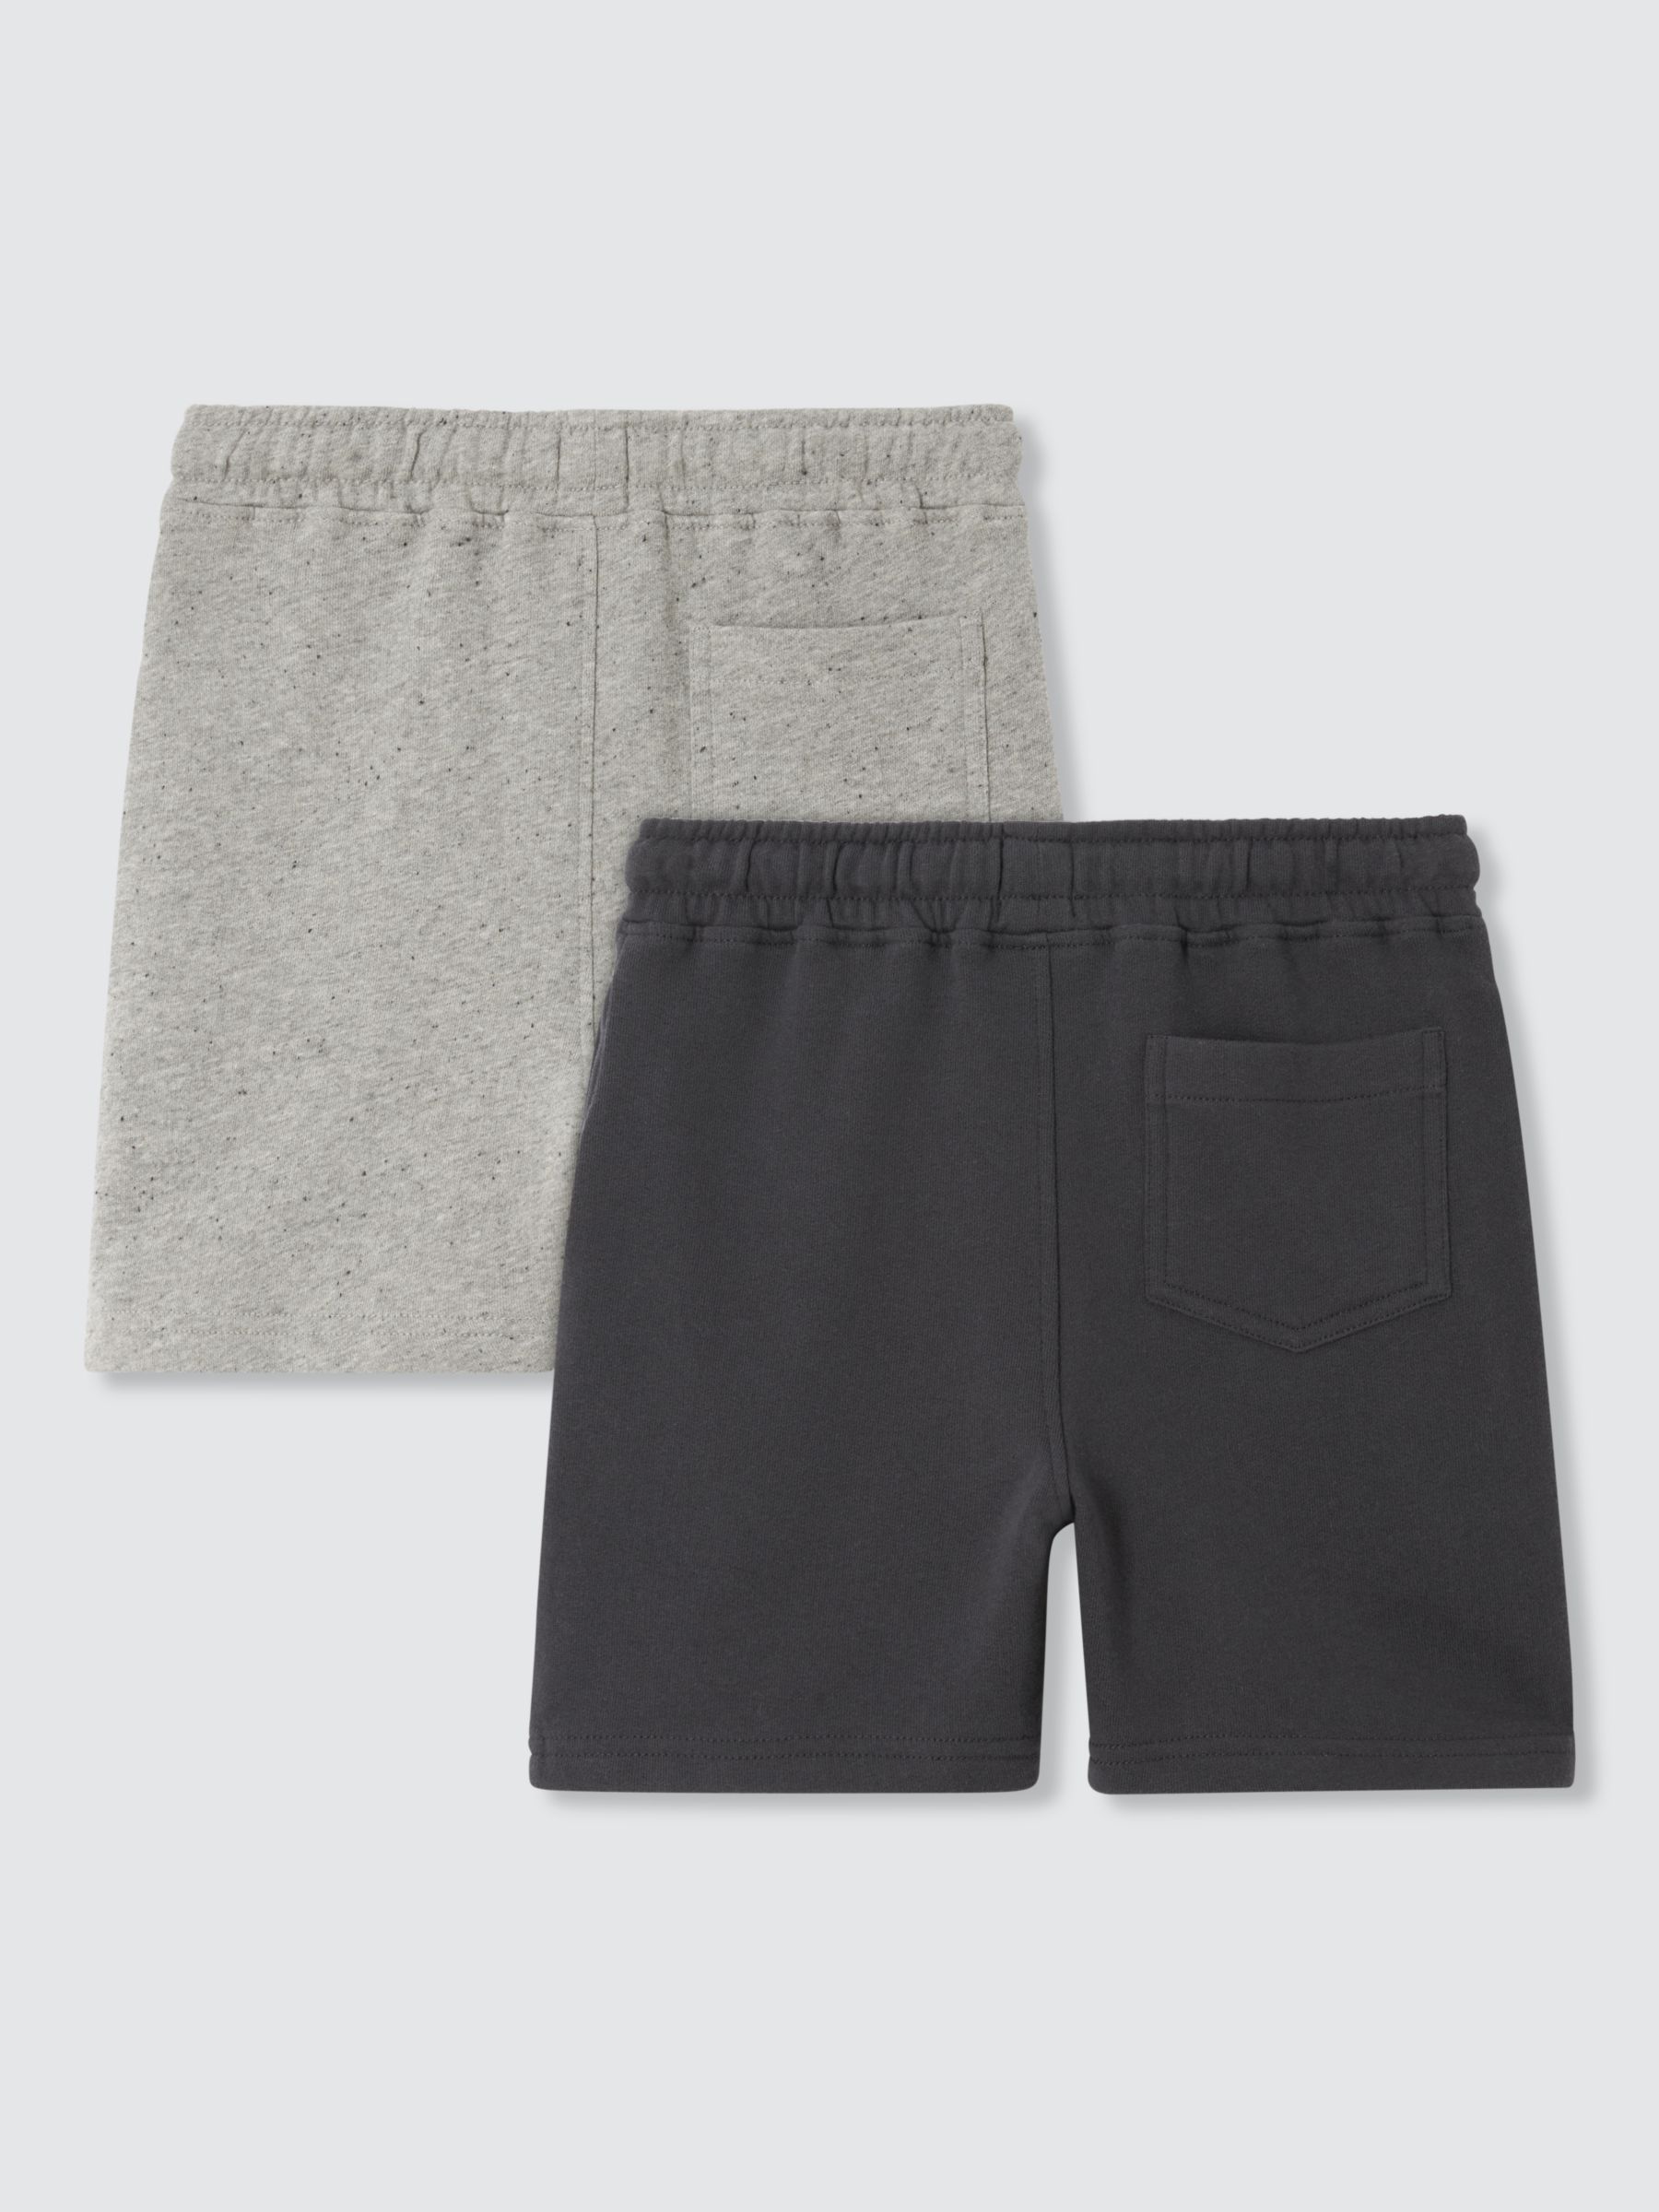 John Lewis Kids' Jersey Shorts, Pack of 2, Charcoal/Grey, 10 years